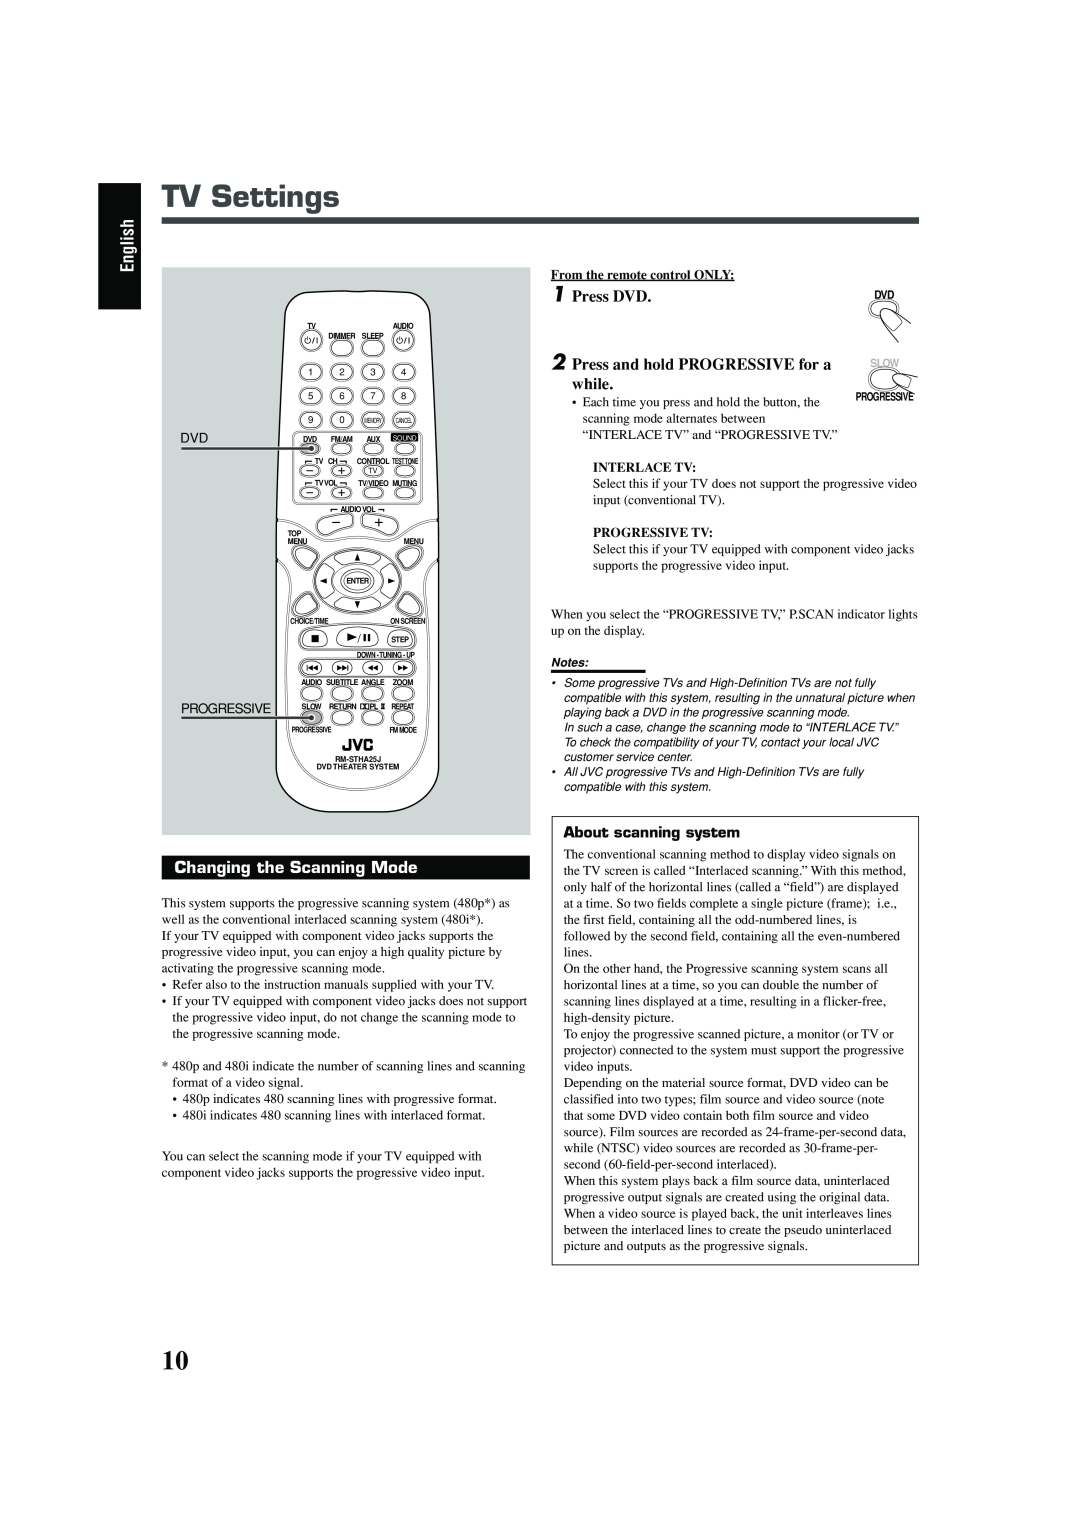 JVC TH-A25 manual TV Settings, Press DVD, Press and hold PROGRESSIVE for a, while, Changing the Scanning Mode, English 